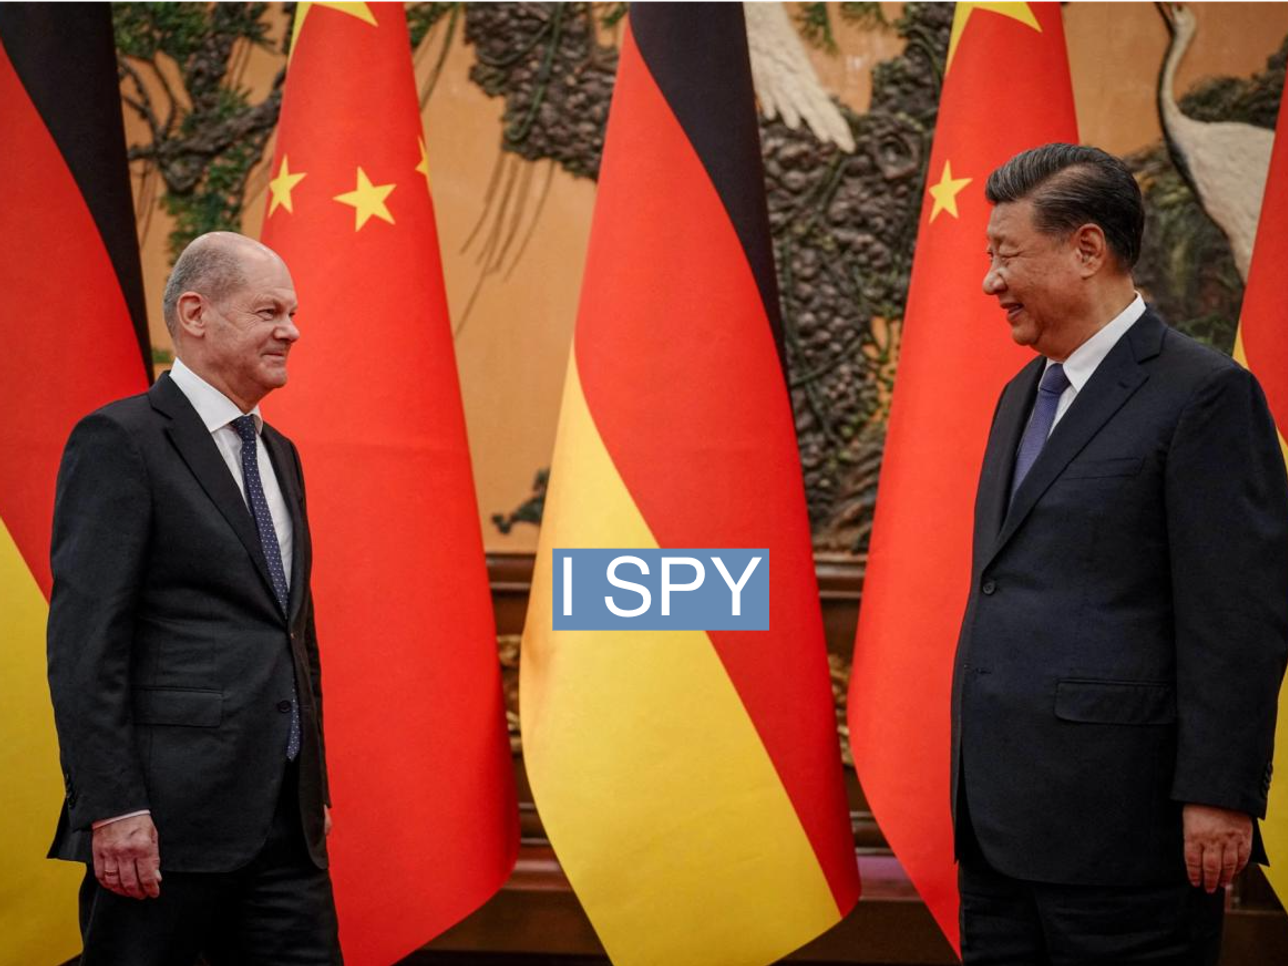 Xi and Scholz